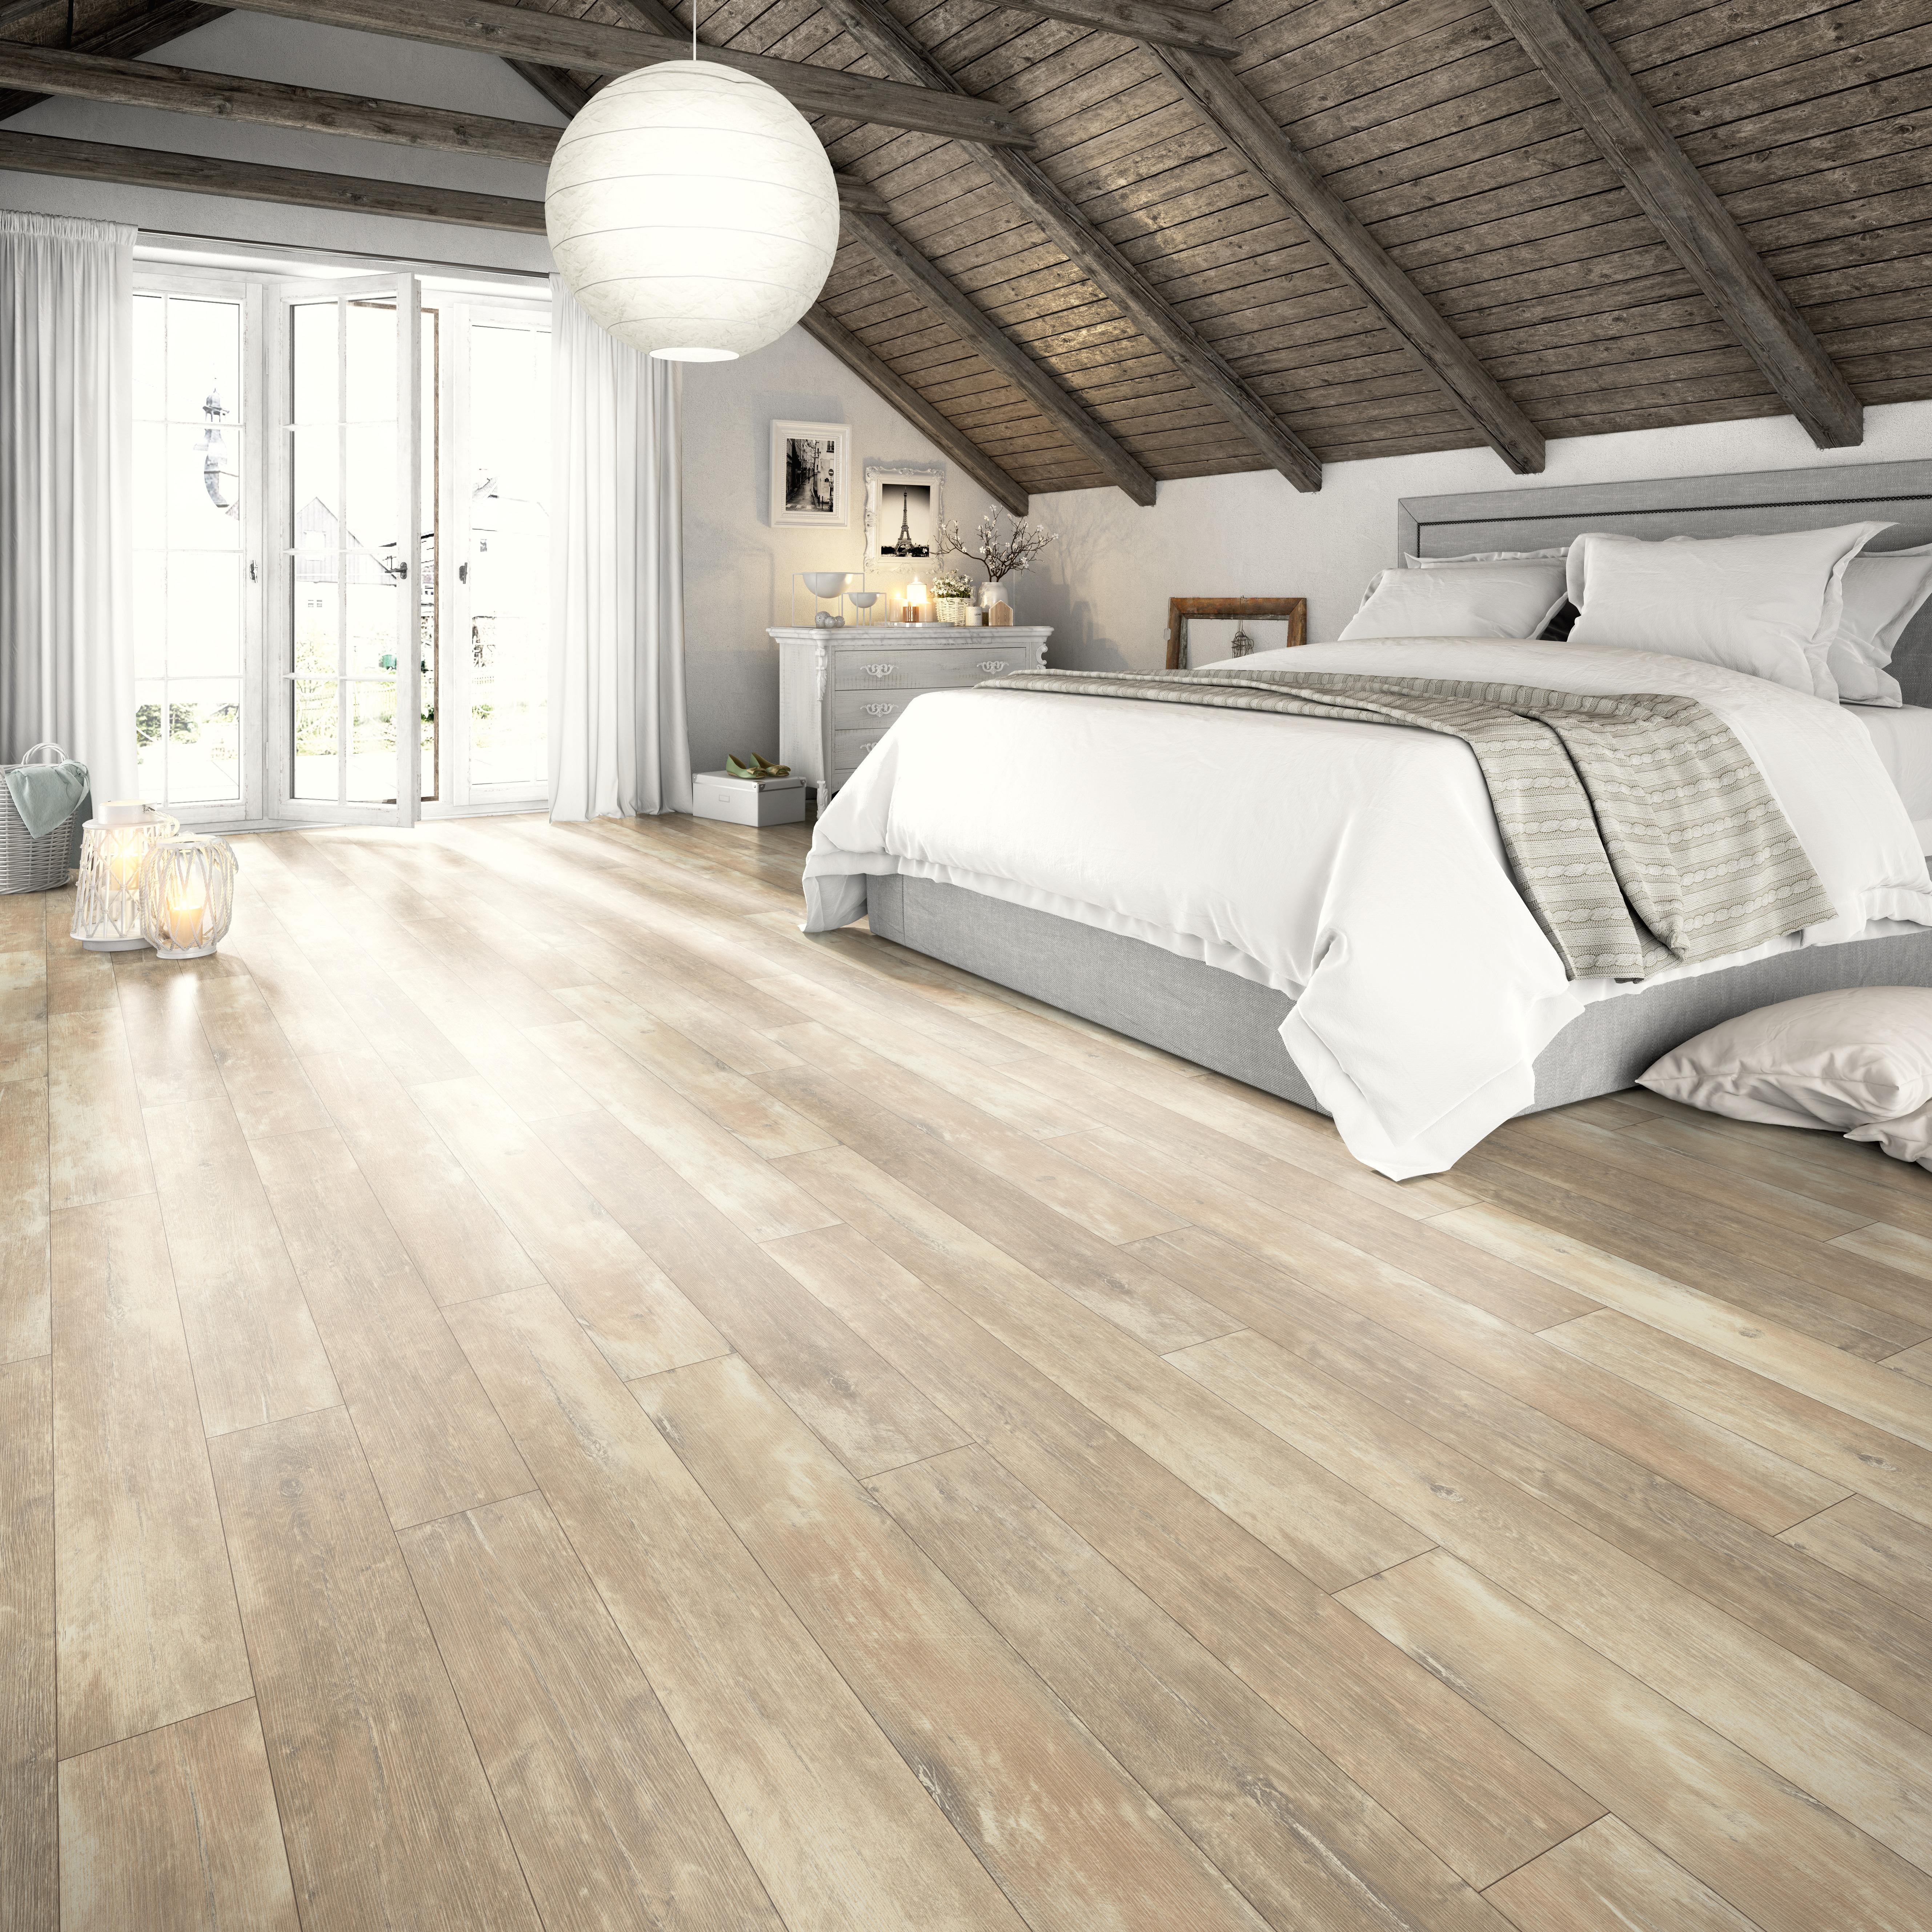 Find out how the product characteristics determine the flooring design.